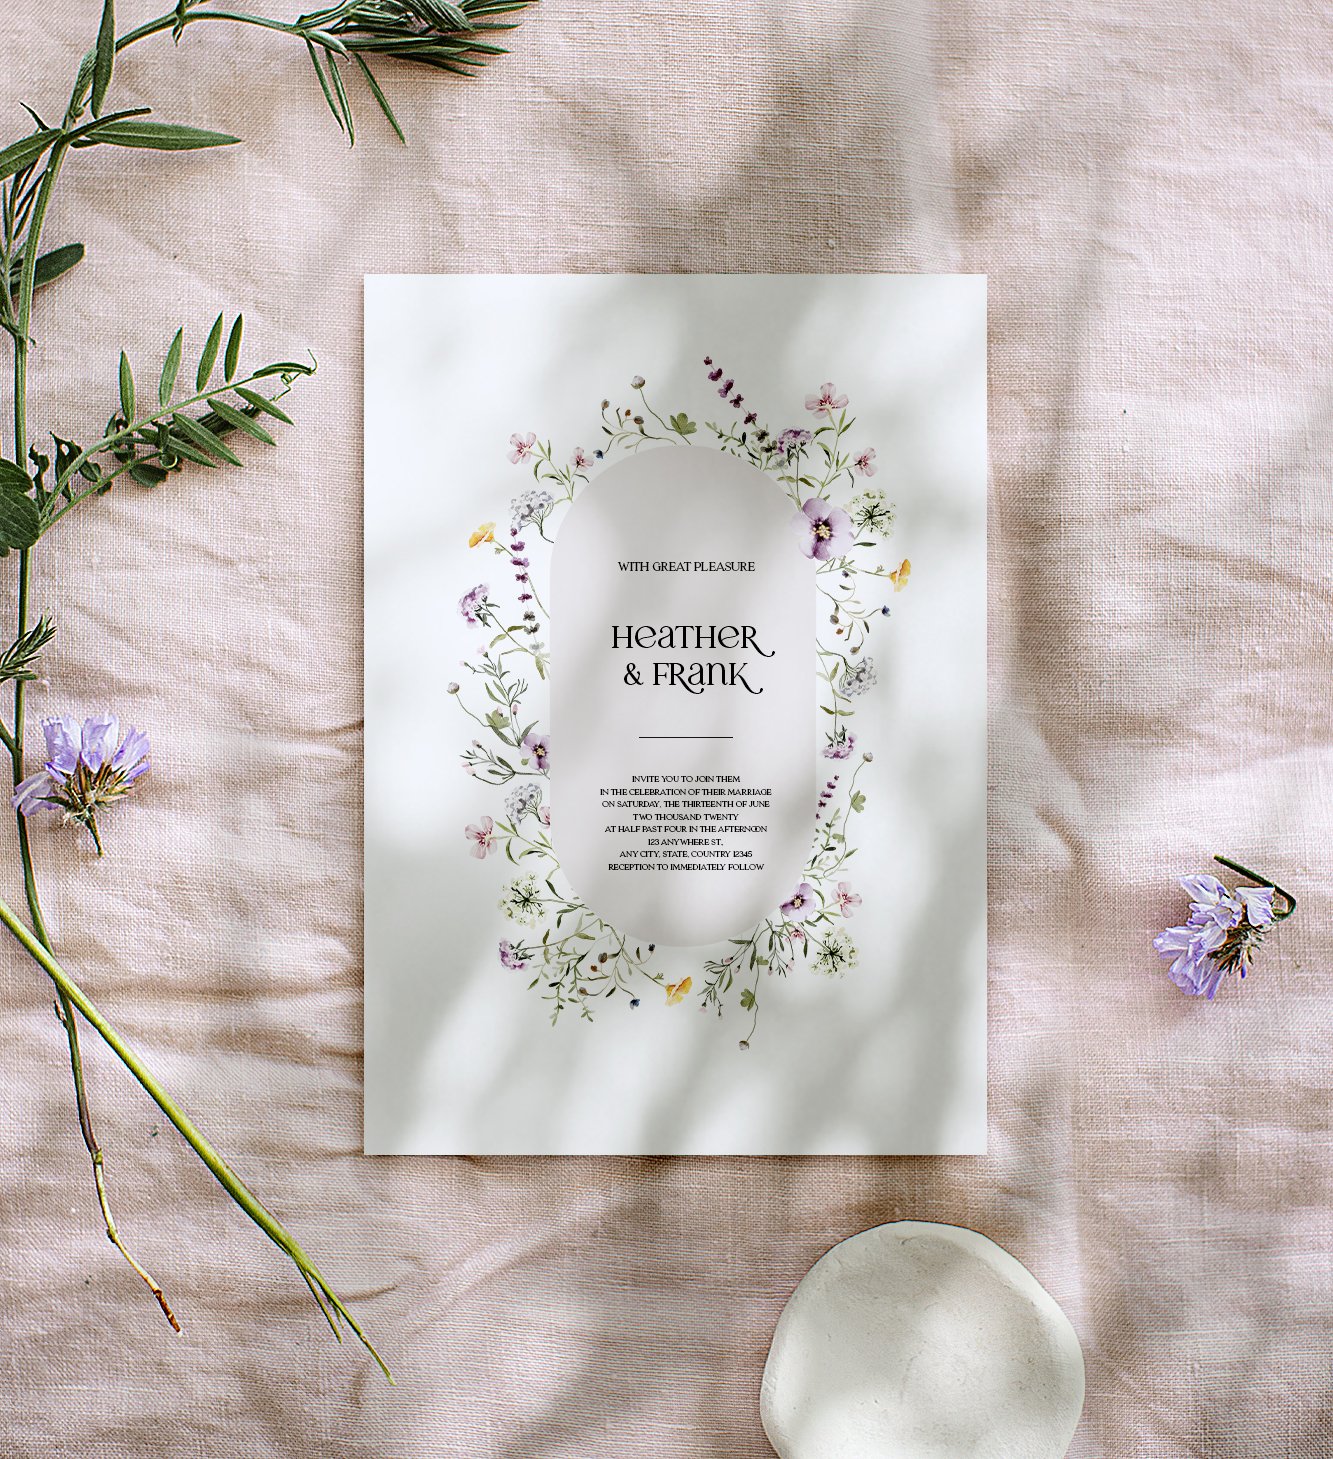 Perfect invitation for the summer and delicate wedding.